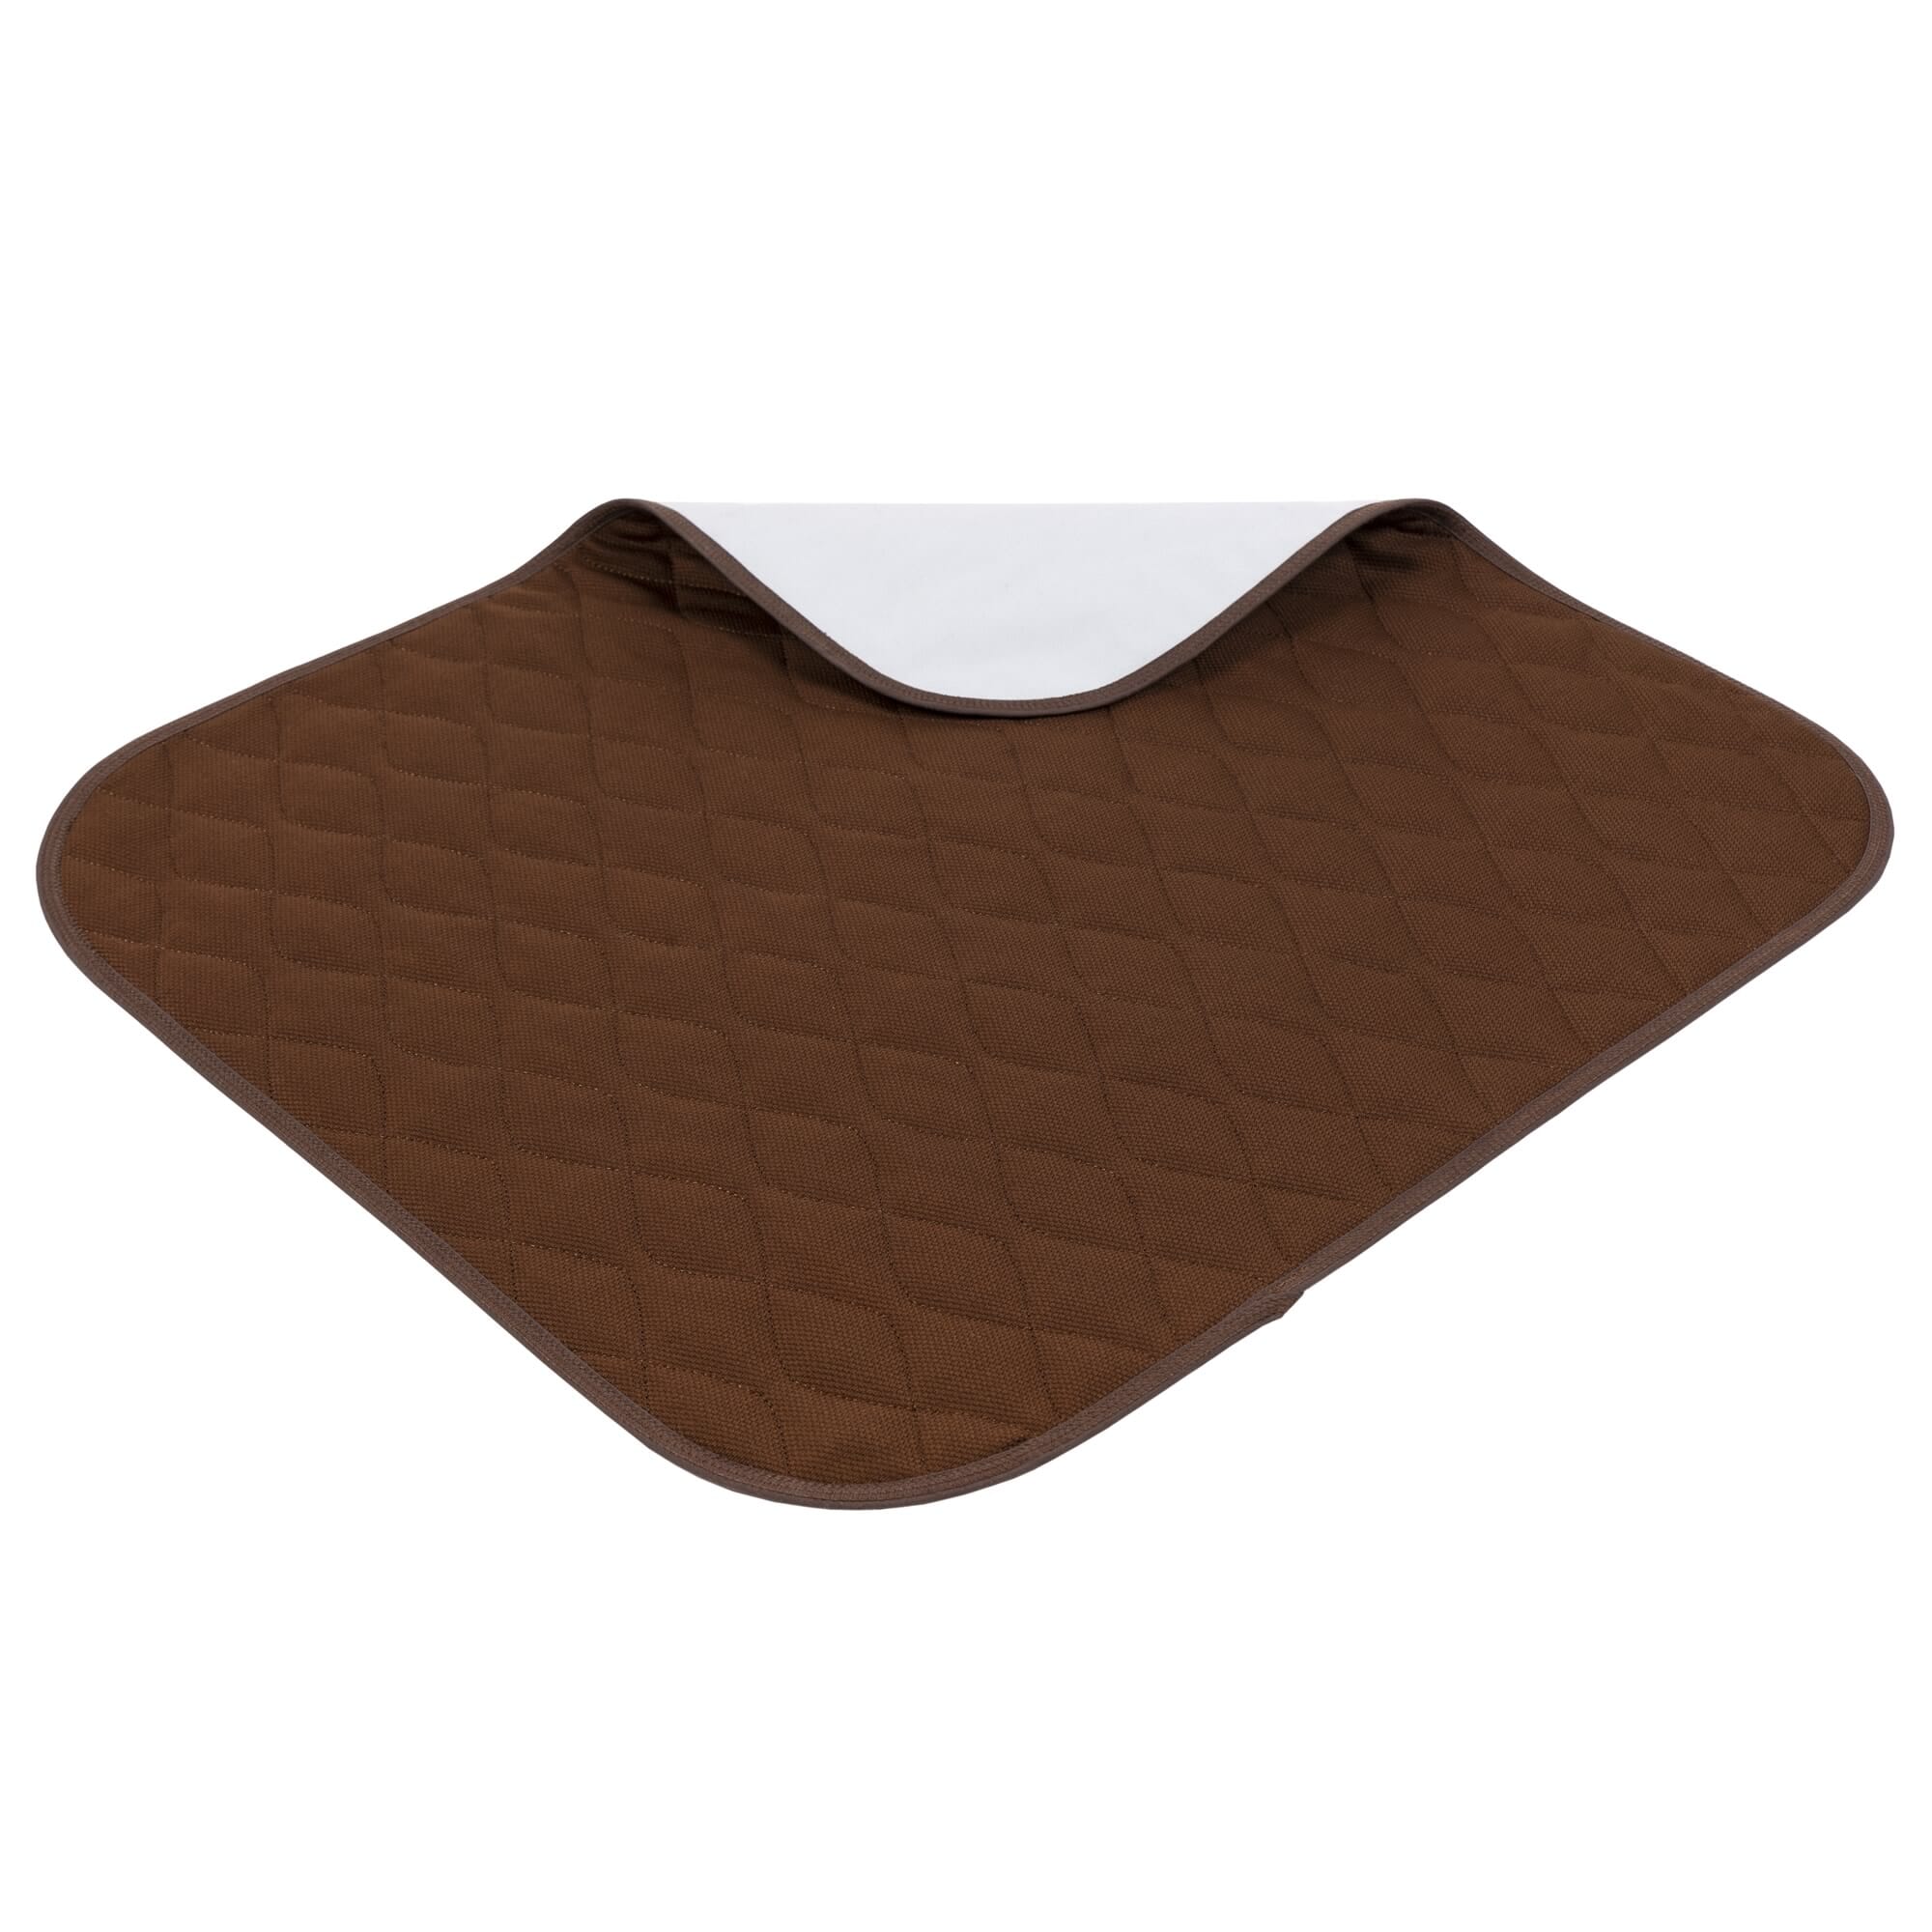 View Economy Chair Pad Brown information